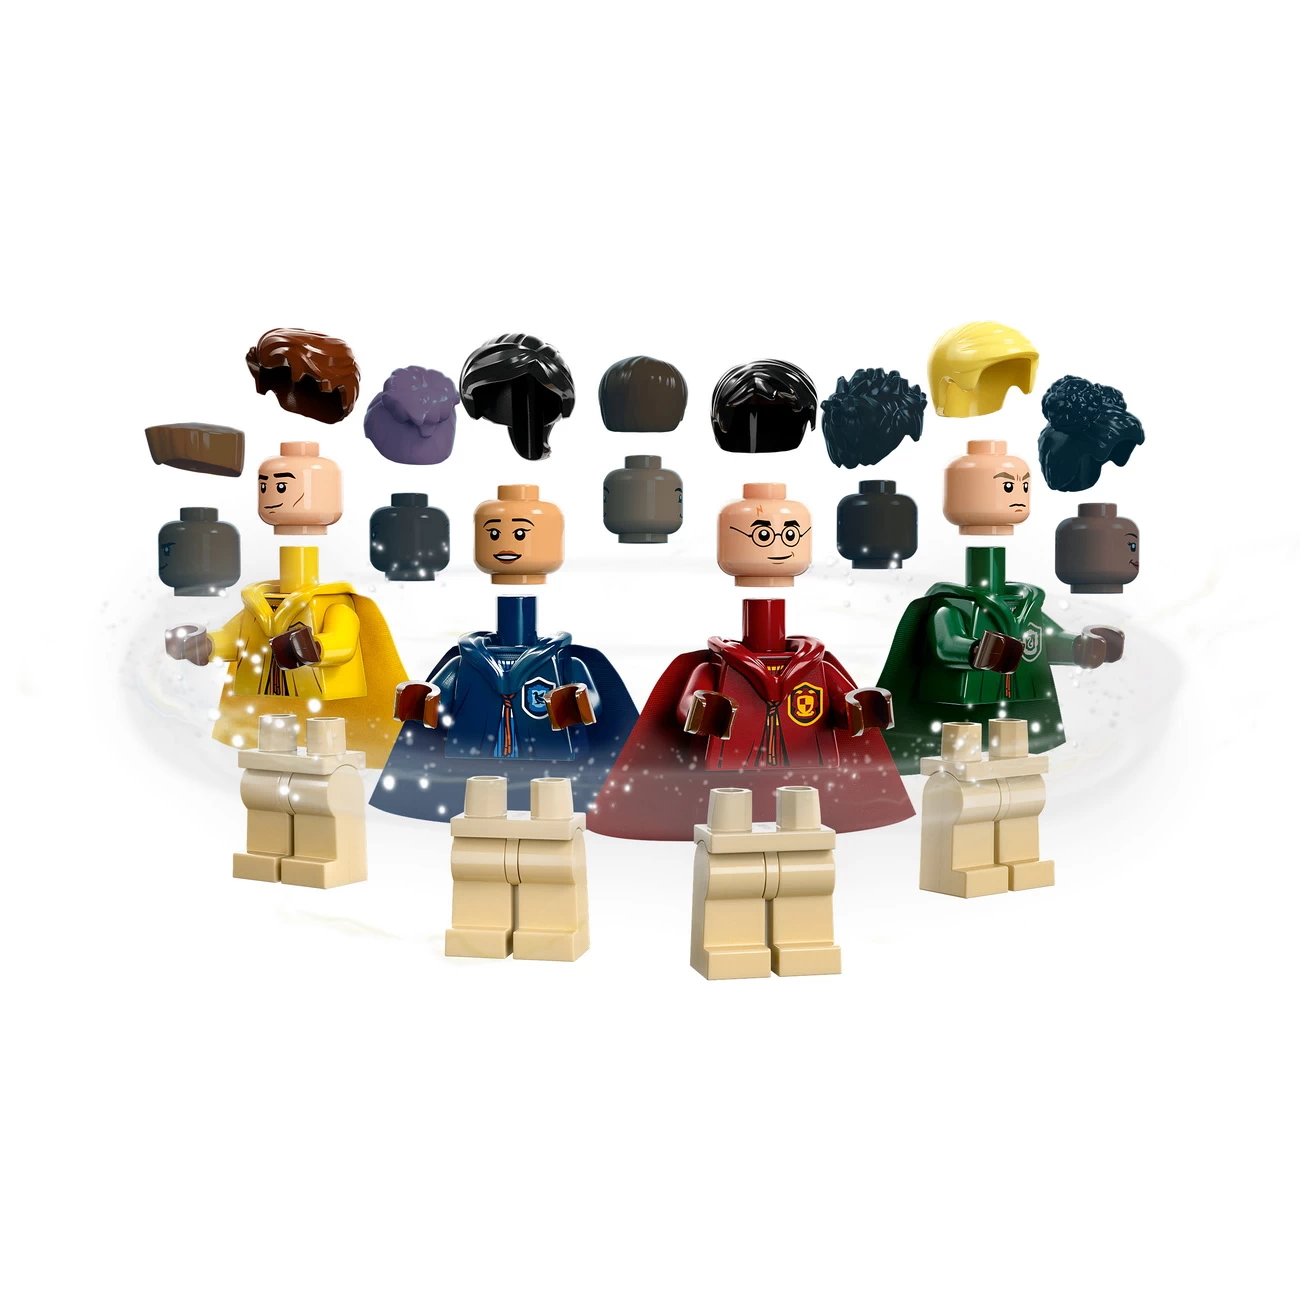 LEGO Harry Potter 76416 - Quidditch Koffer